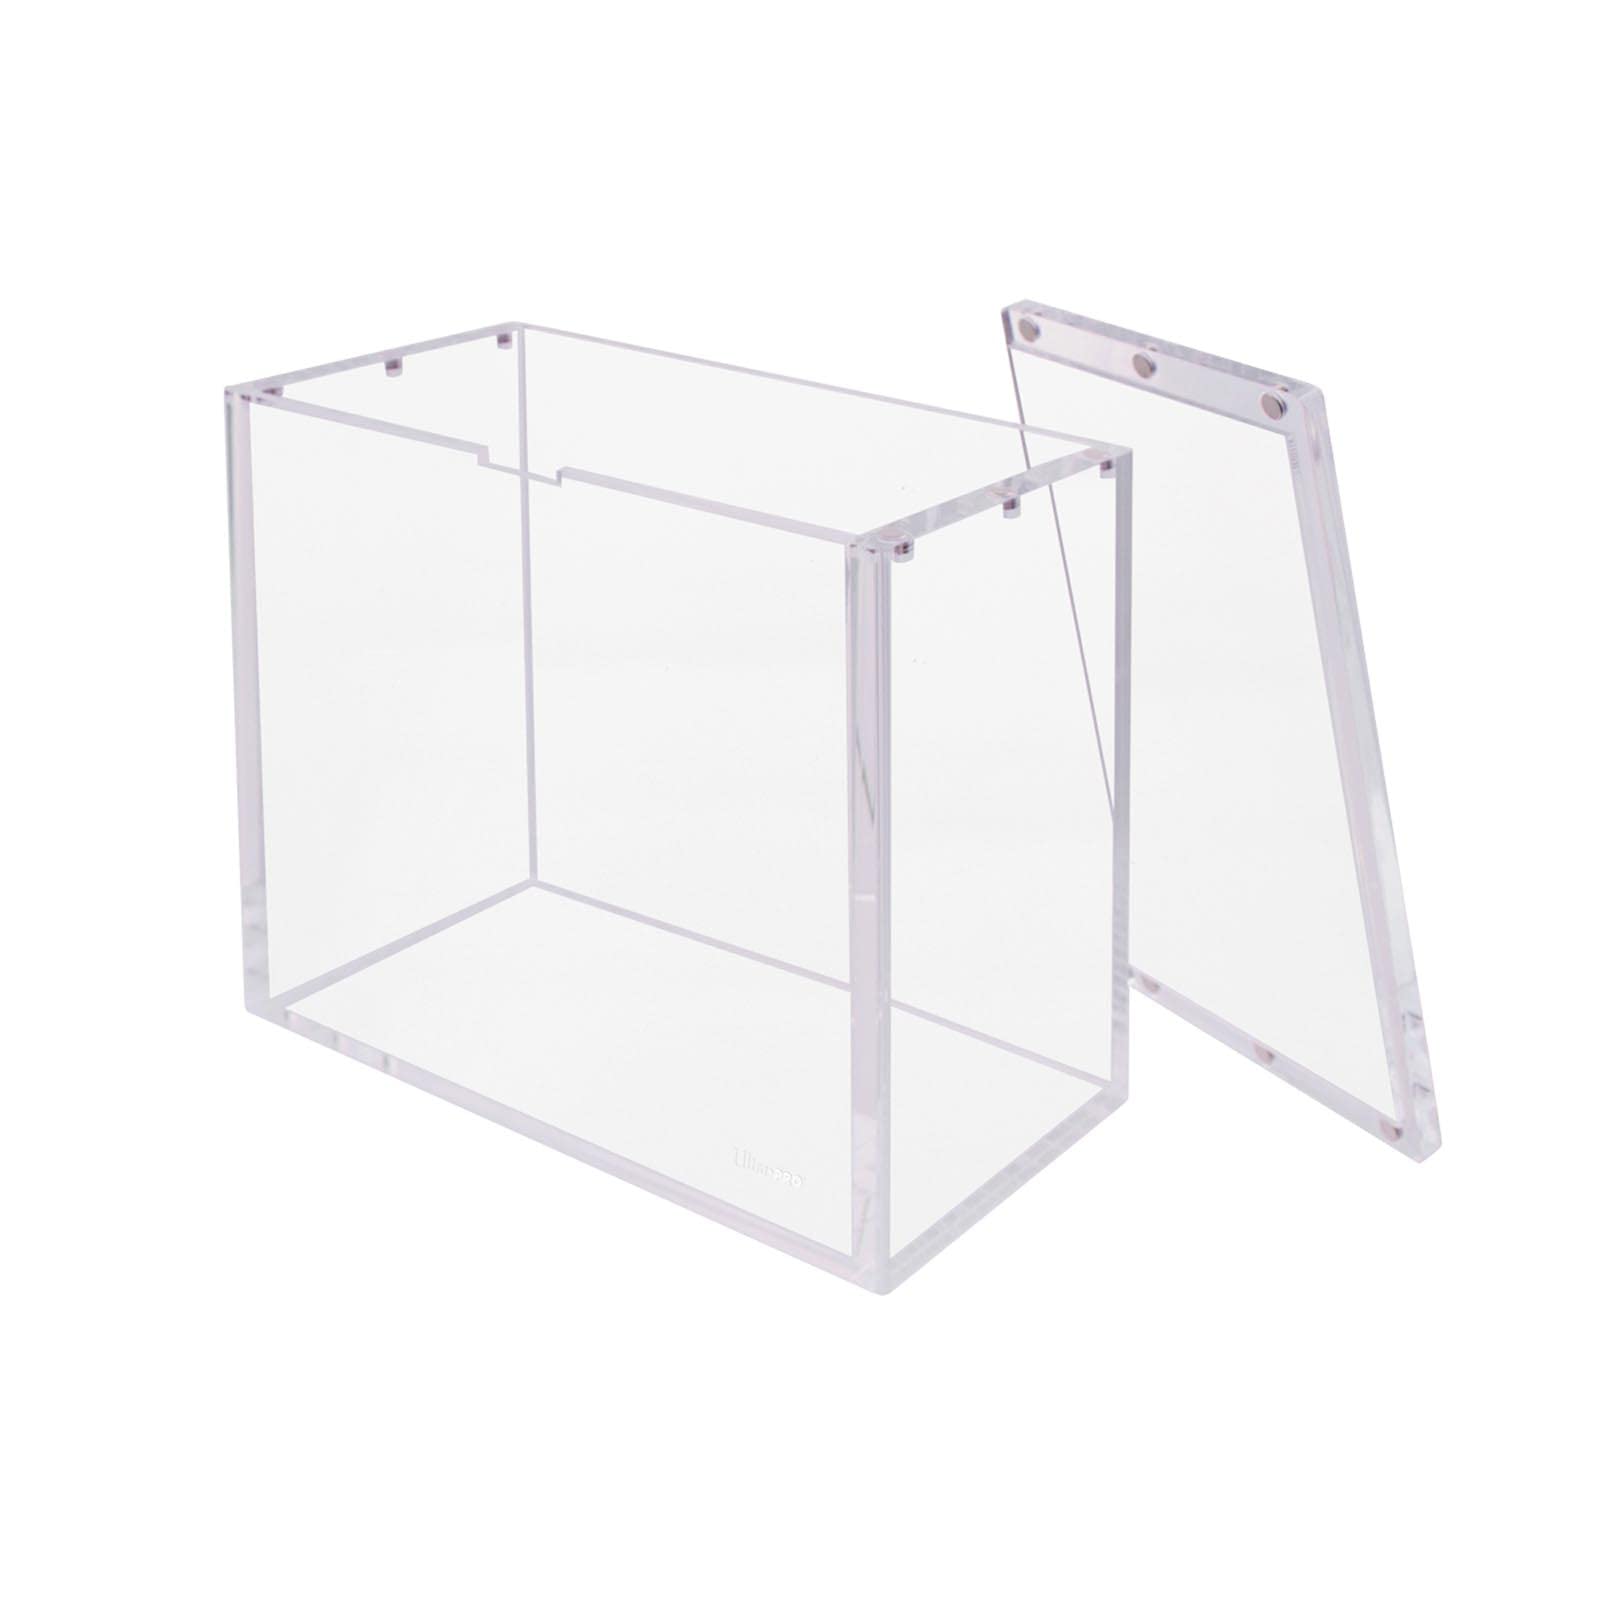 Ultra PRO - Acrylic Display Box for Pokémon Booster Pack - Protect Your Collectible Cards, and Gaming Cards in Original in Box Condition, Card Protector